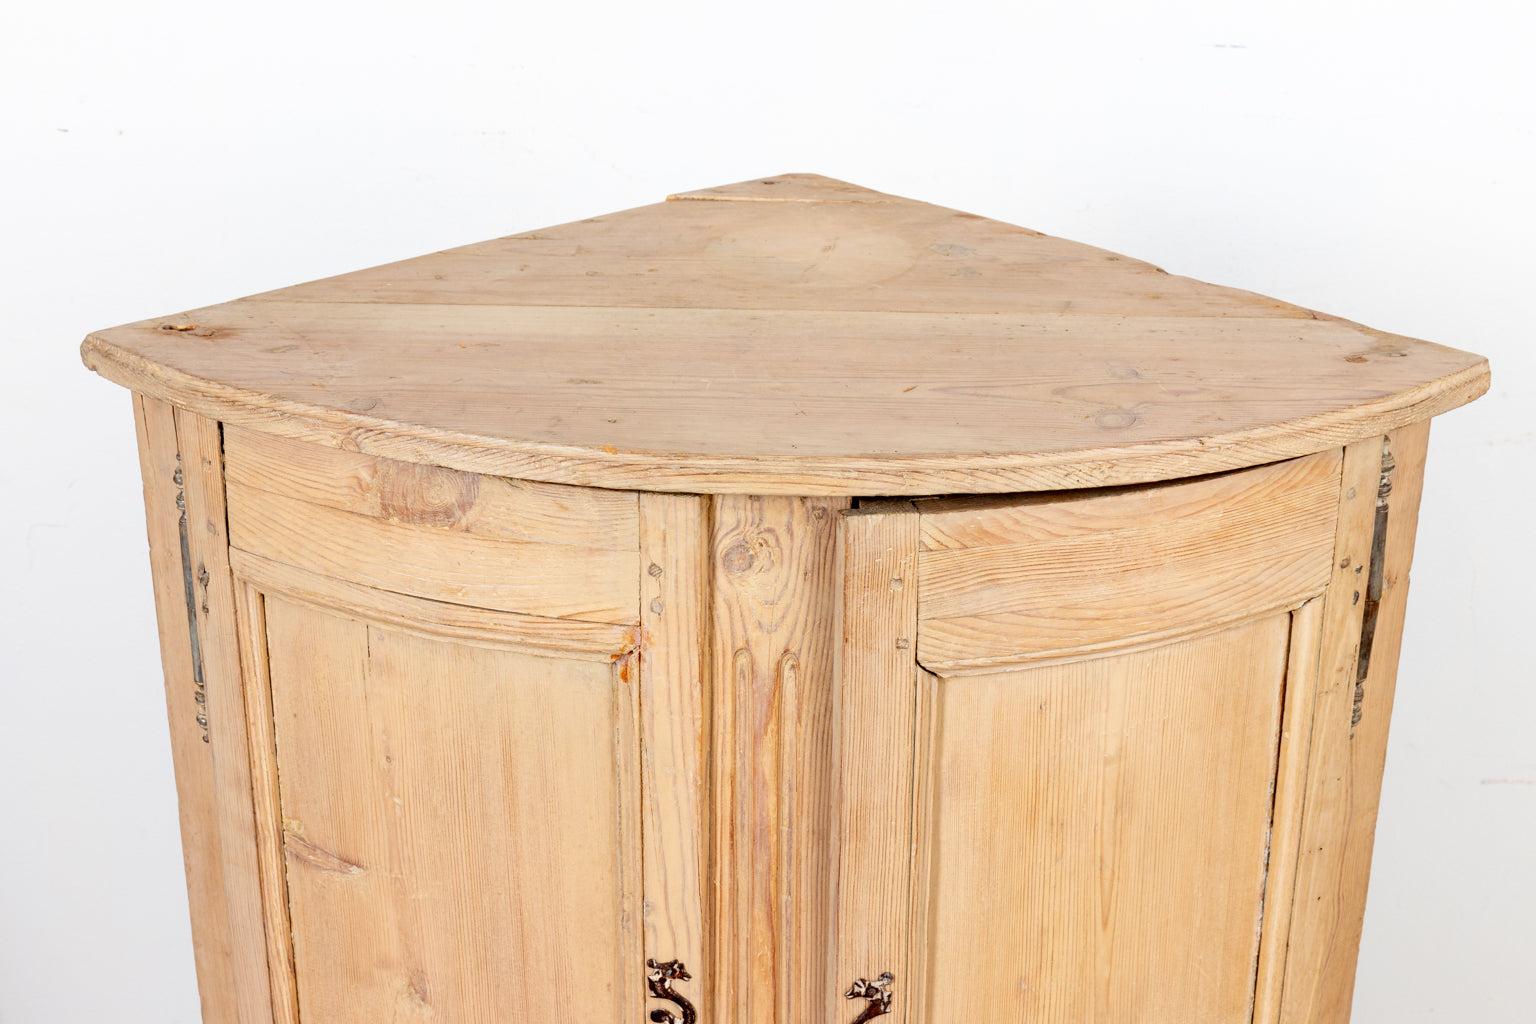 French Provincial Mid-19th Century French Pine Corner Cabinet For Sale